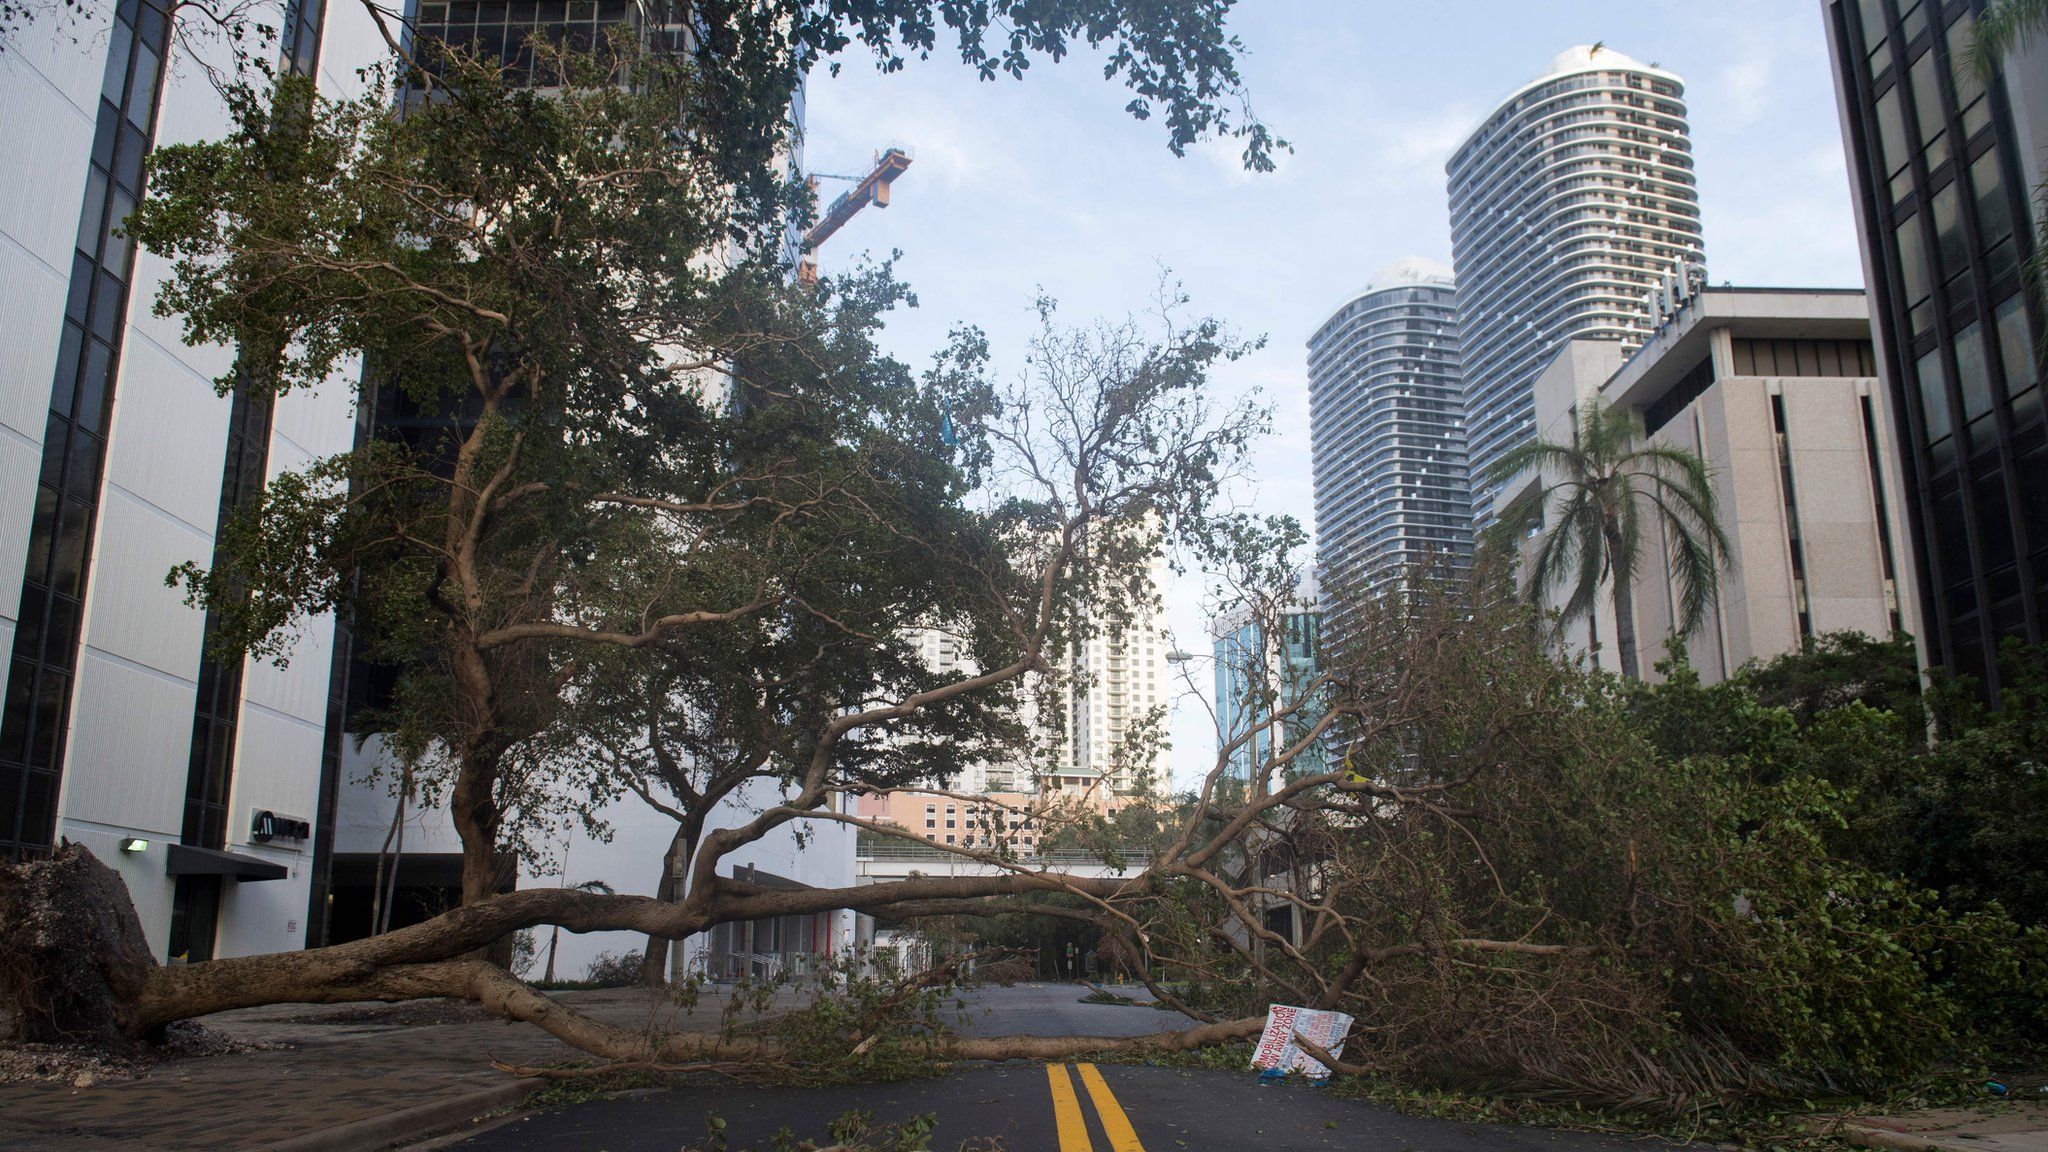 A fallen tree toppled by Hurricane Irma blocks a street in downtown Miami, Florida, on September 11, 2017